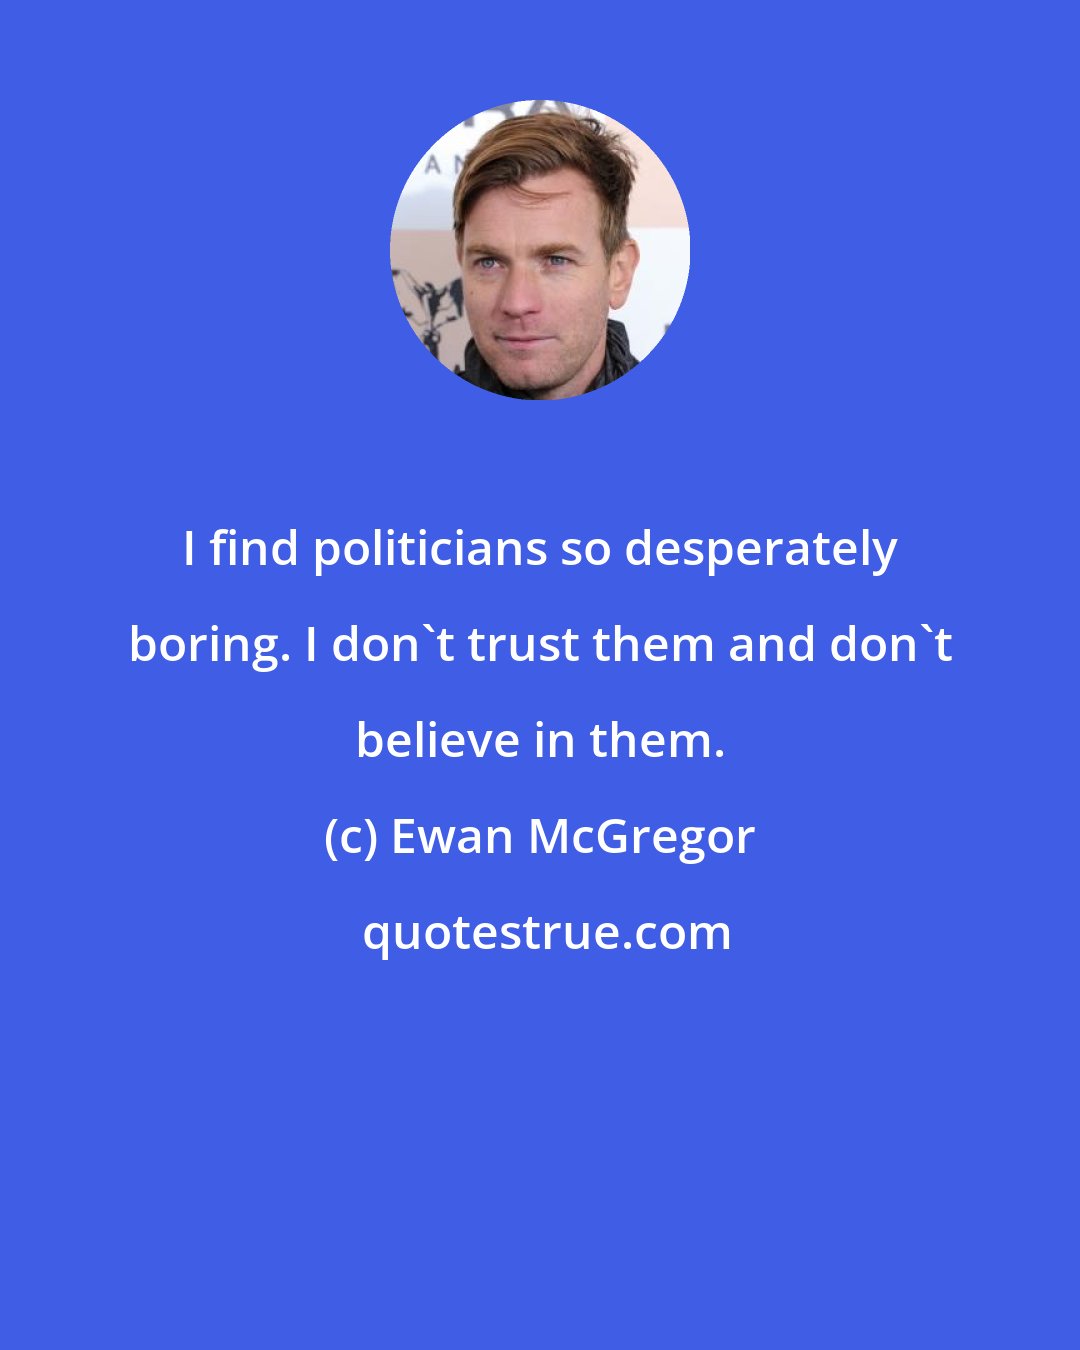 Ewan McGregor: I find politicians so desperately boring. I don't trust them and don't believe in them.